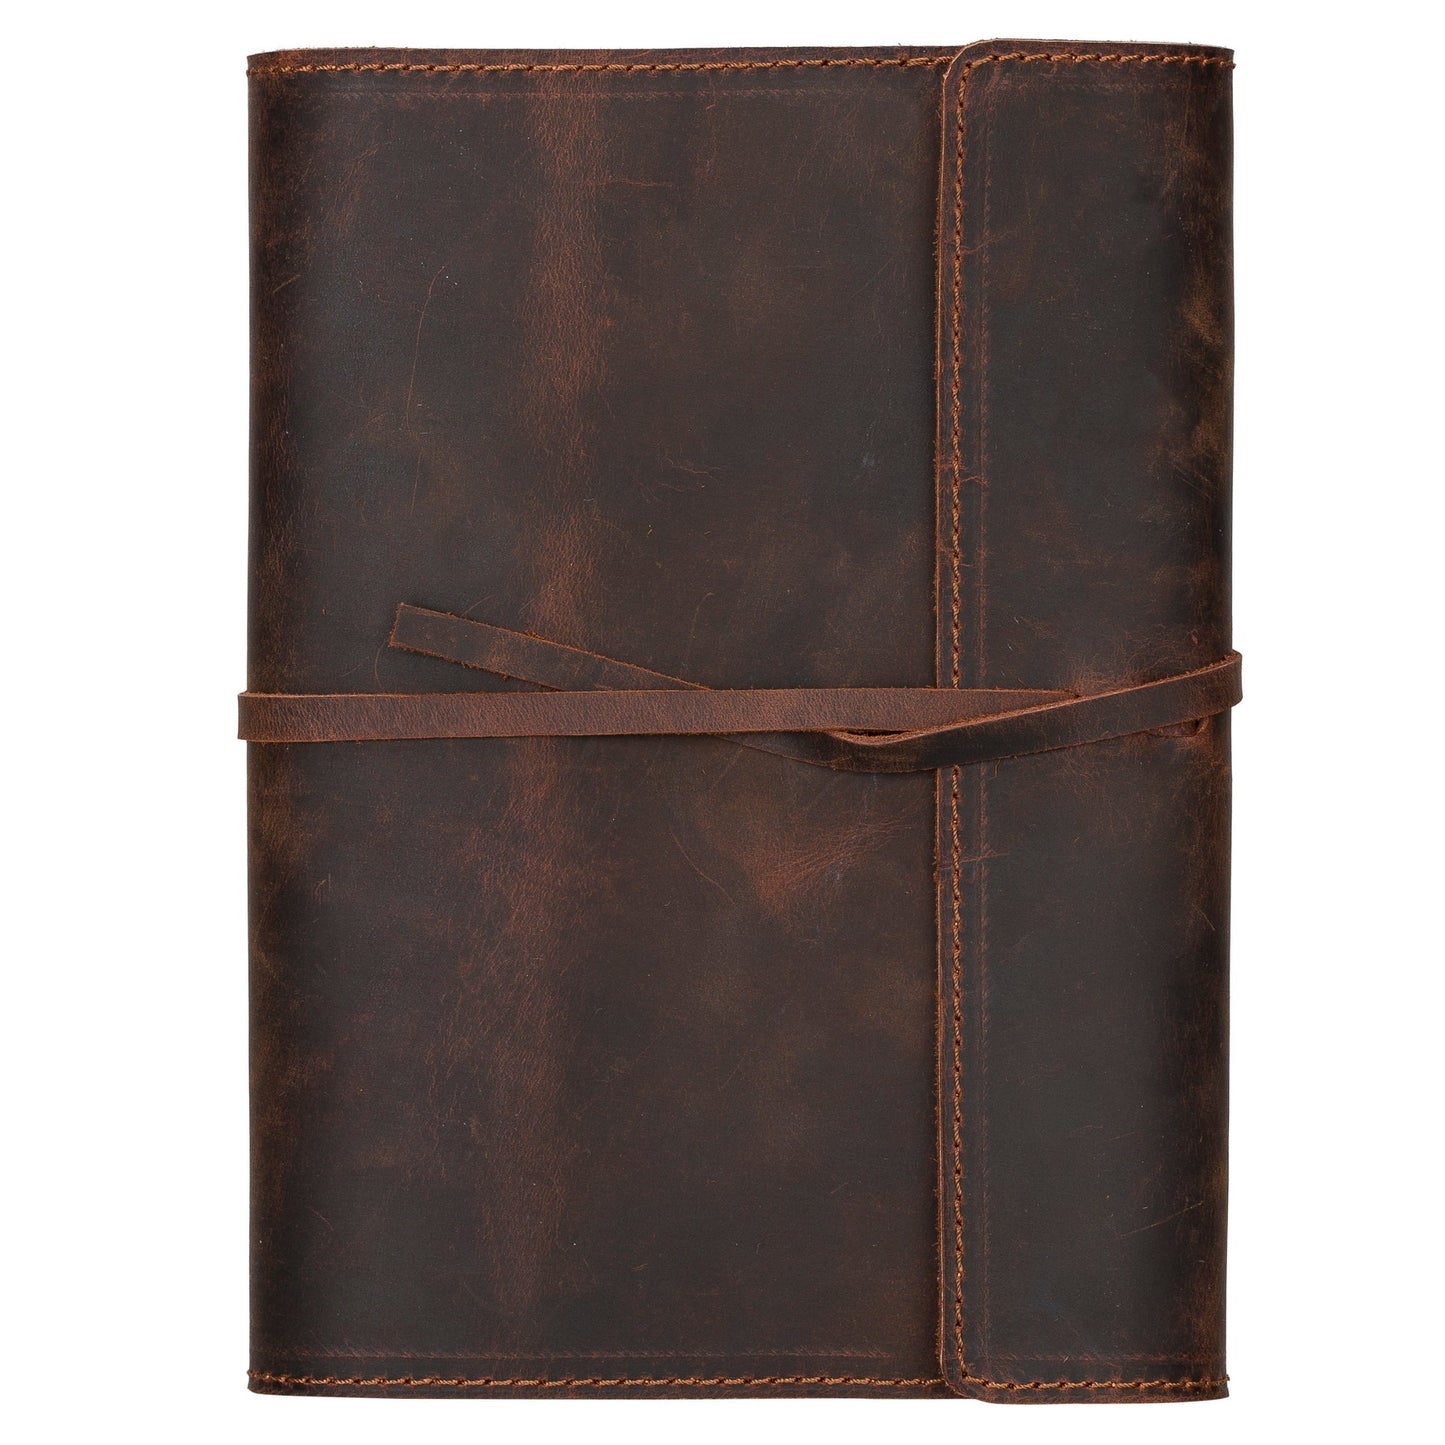 Broomfield Handcrafted Leather Diary Cover